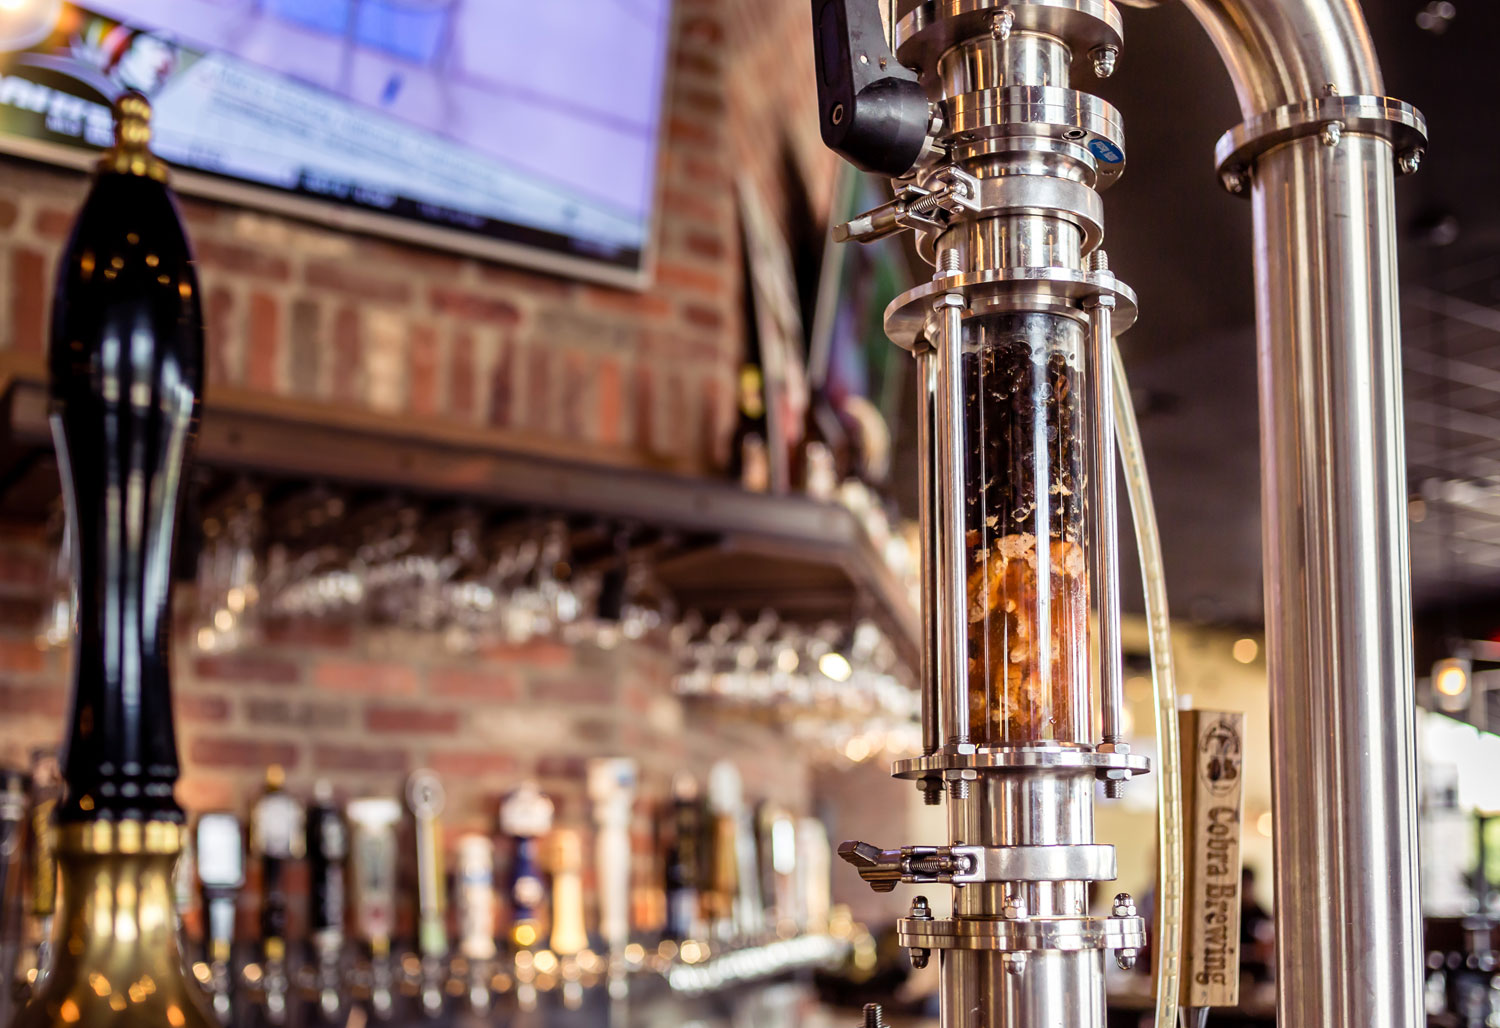 WORLD-OF-BEER-RESTAURANT-PLANO-MAGAZINE-INFUSION-TOWER